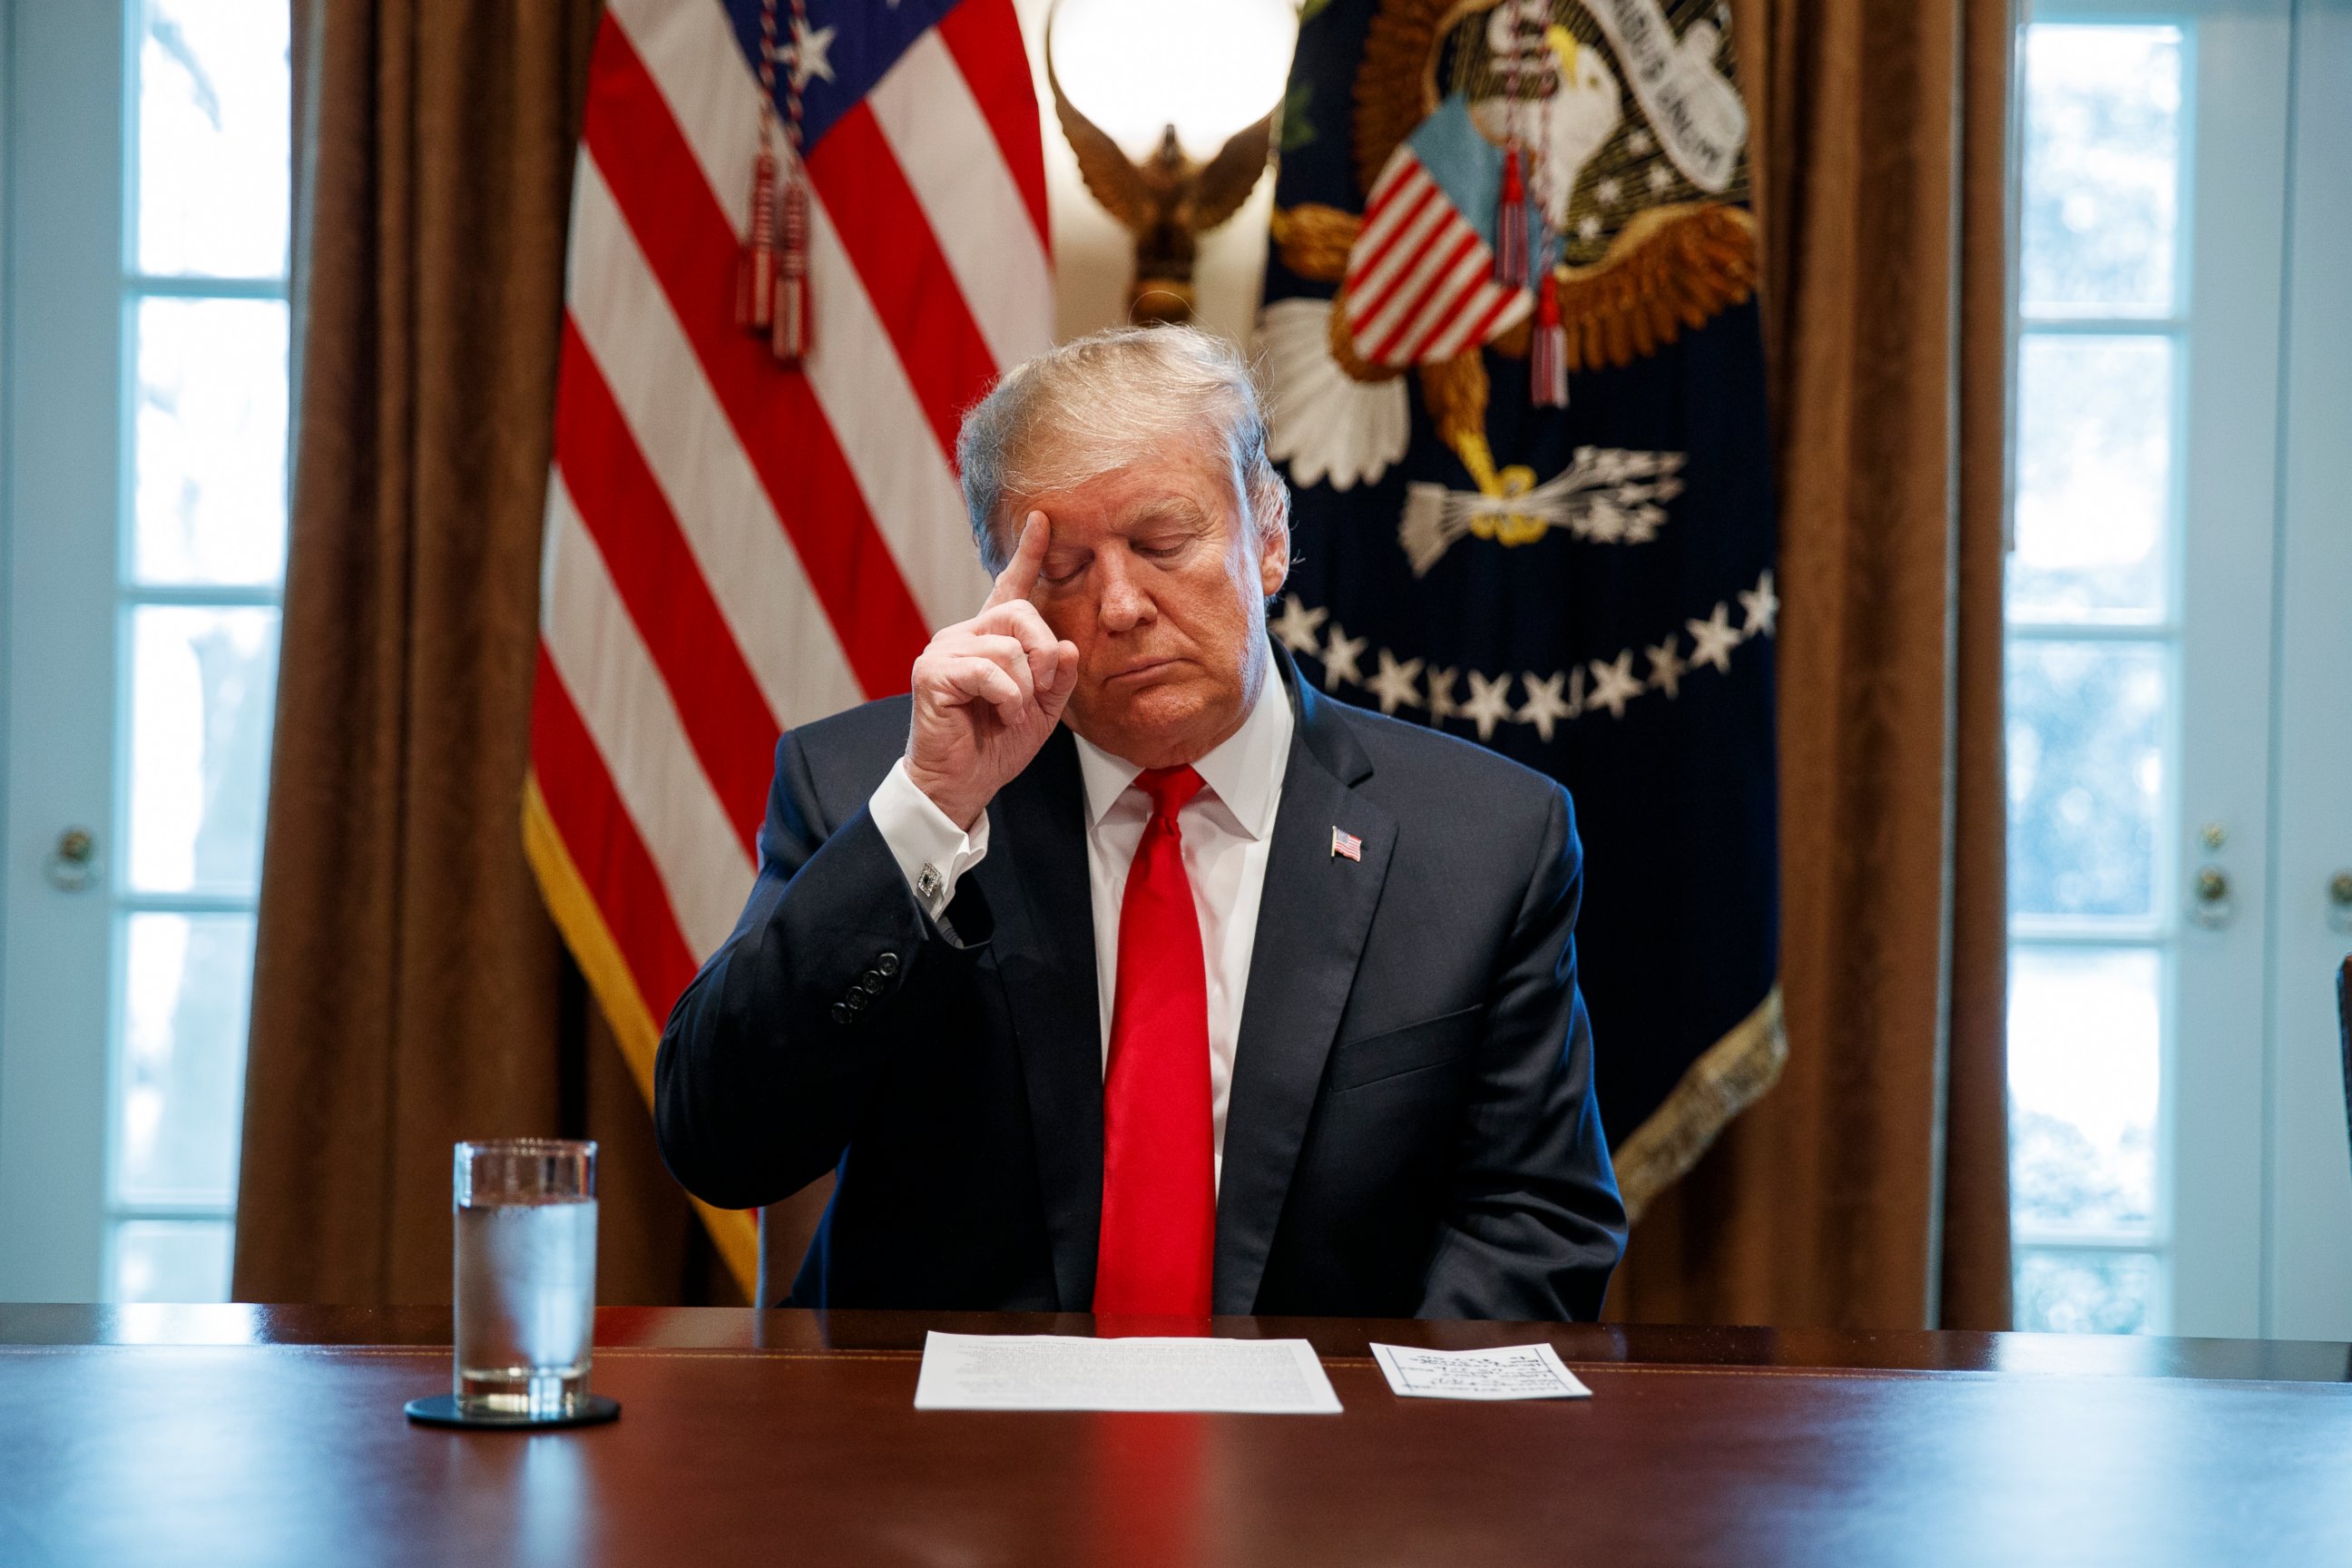 PHOTO: President Donald Trump looks at his notes before speaking during an event on human trafficking in the Cabinet Room of the White House, Friday, Feb. 1, 2019, in Washington.